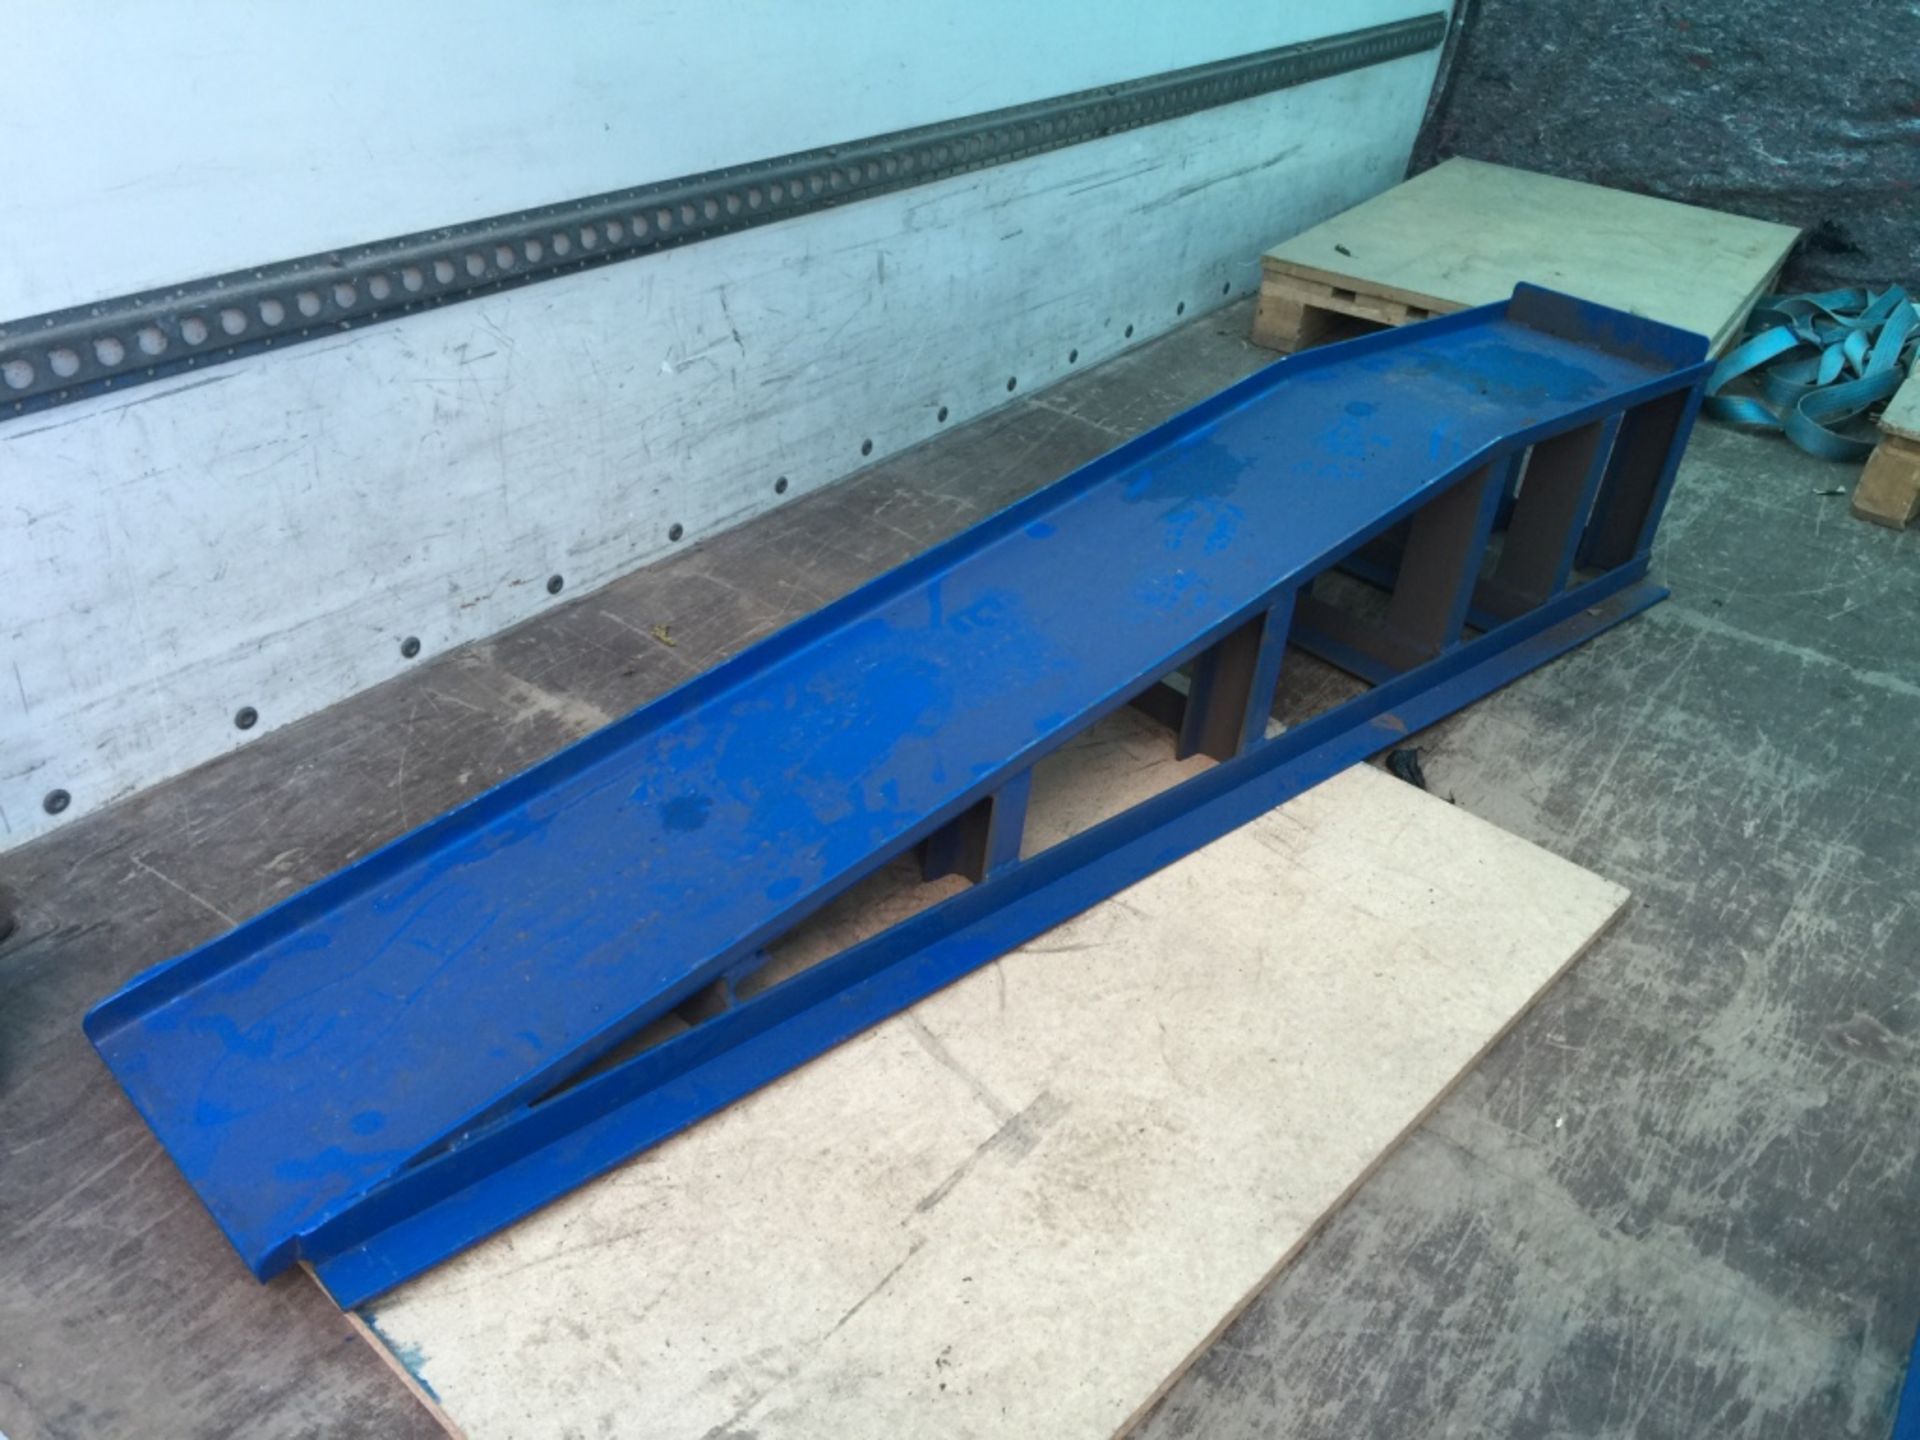 Pair of Heavy Duty Commercial Grade Drive On Ramps, 2 metre length, Very Heavy Grade Construction